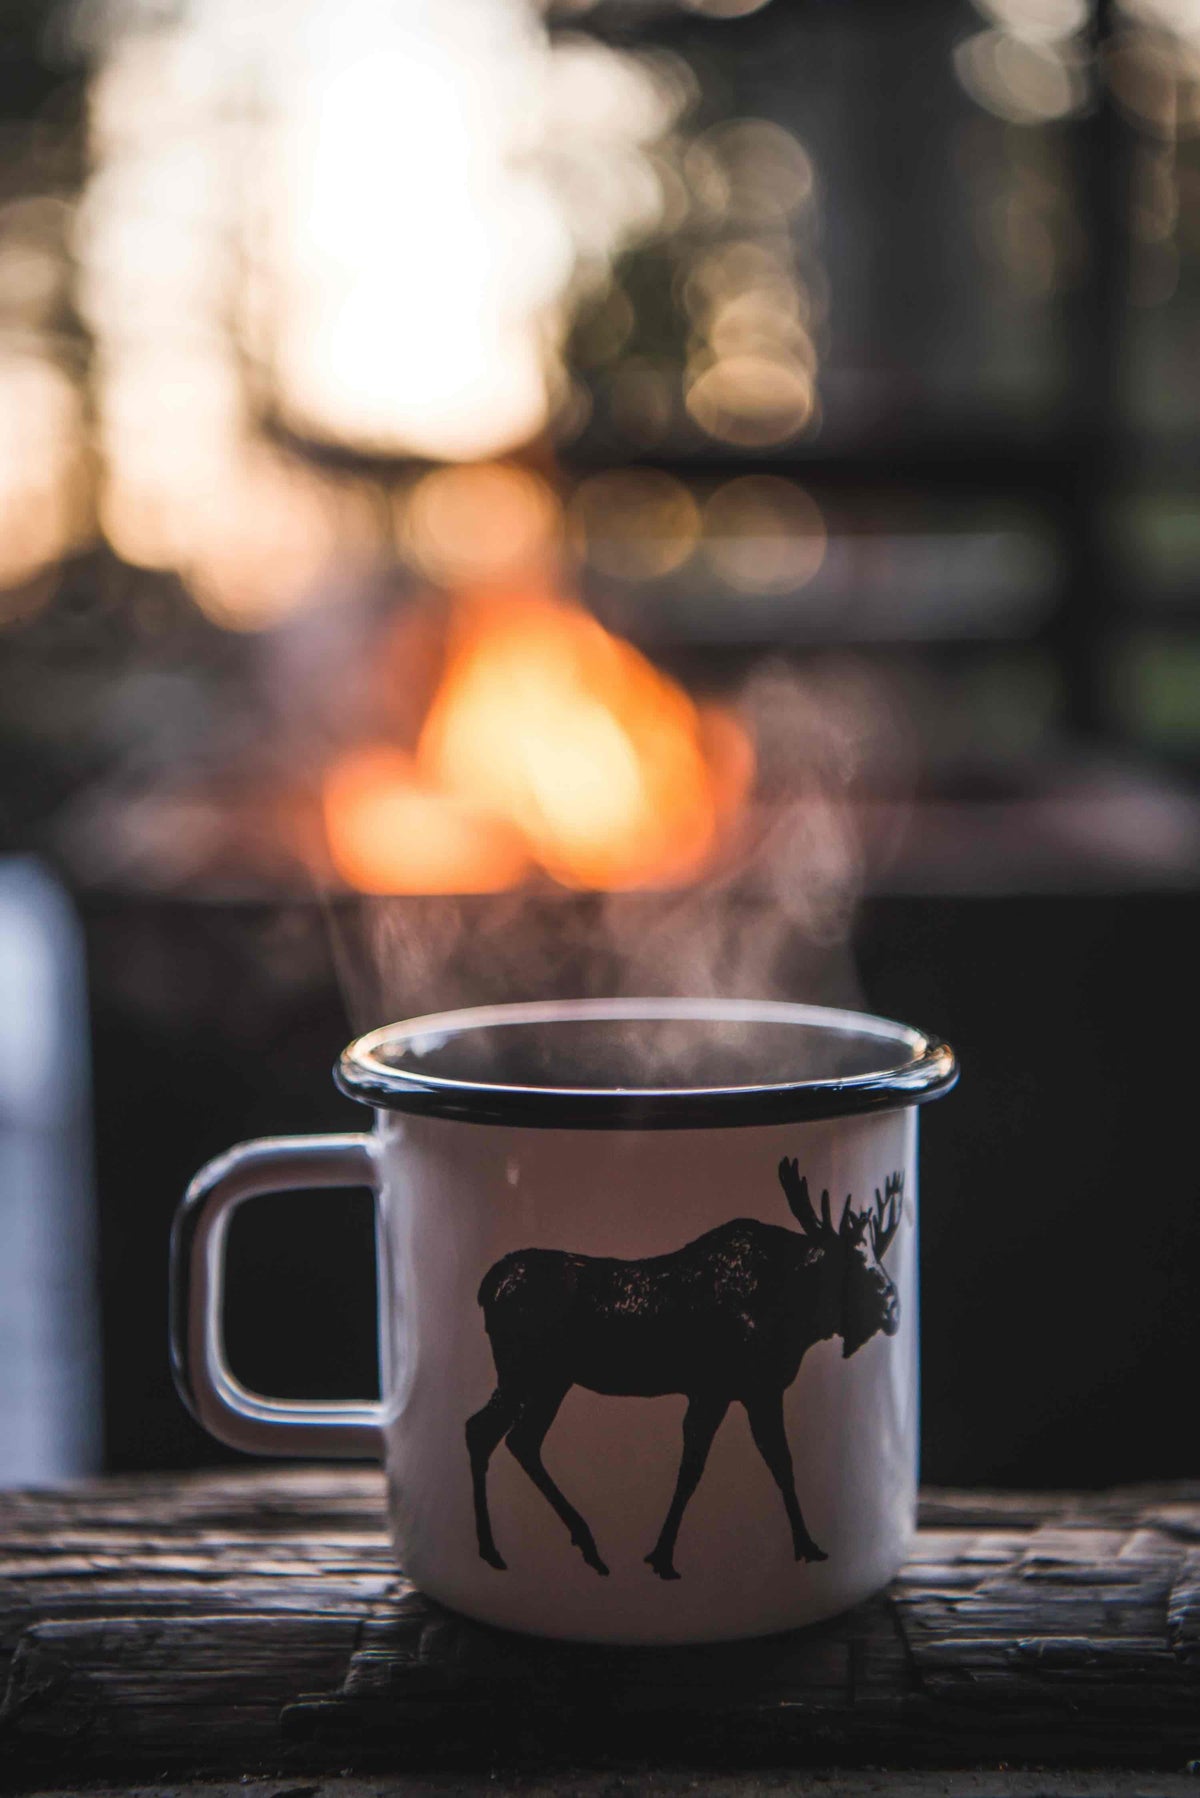 Muurla Design the Moose Mug with Hot steam coming out of it